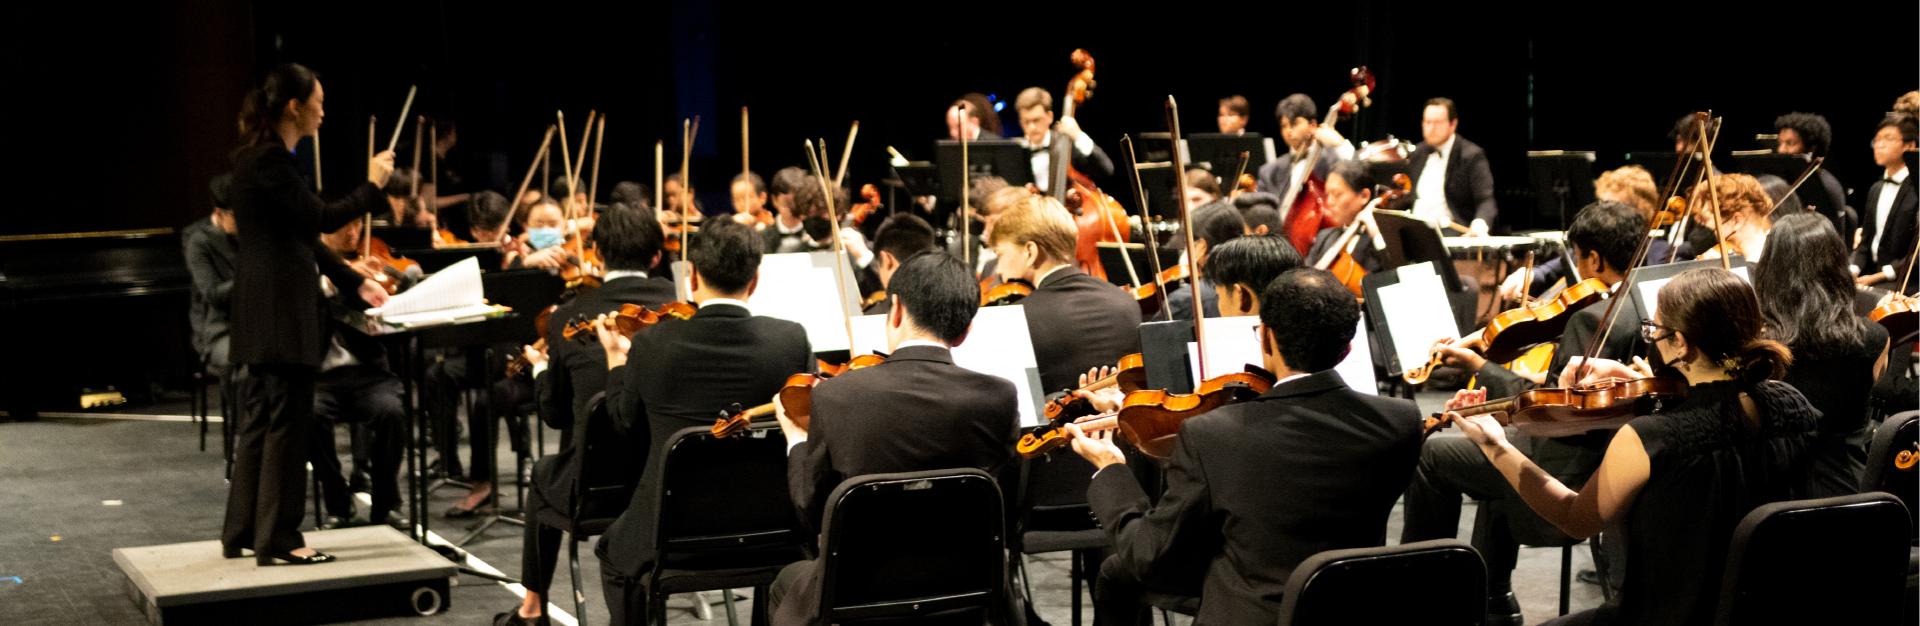 GT Symphony Orchestra plays on stage at the Ferst Center